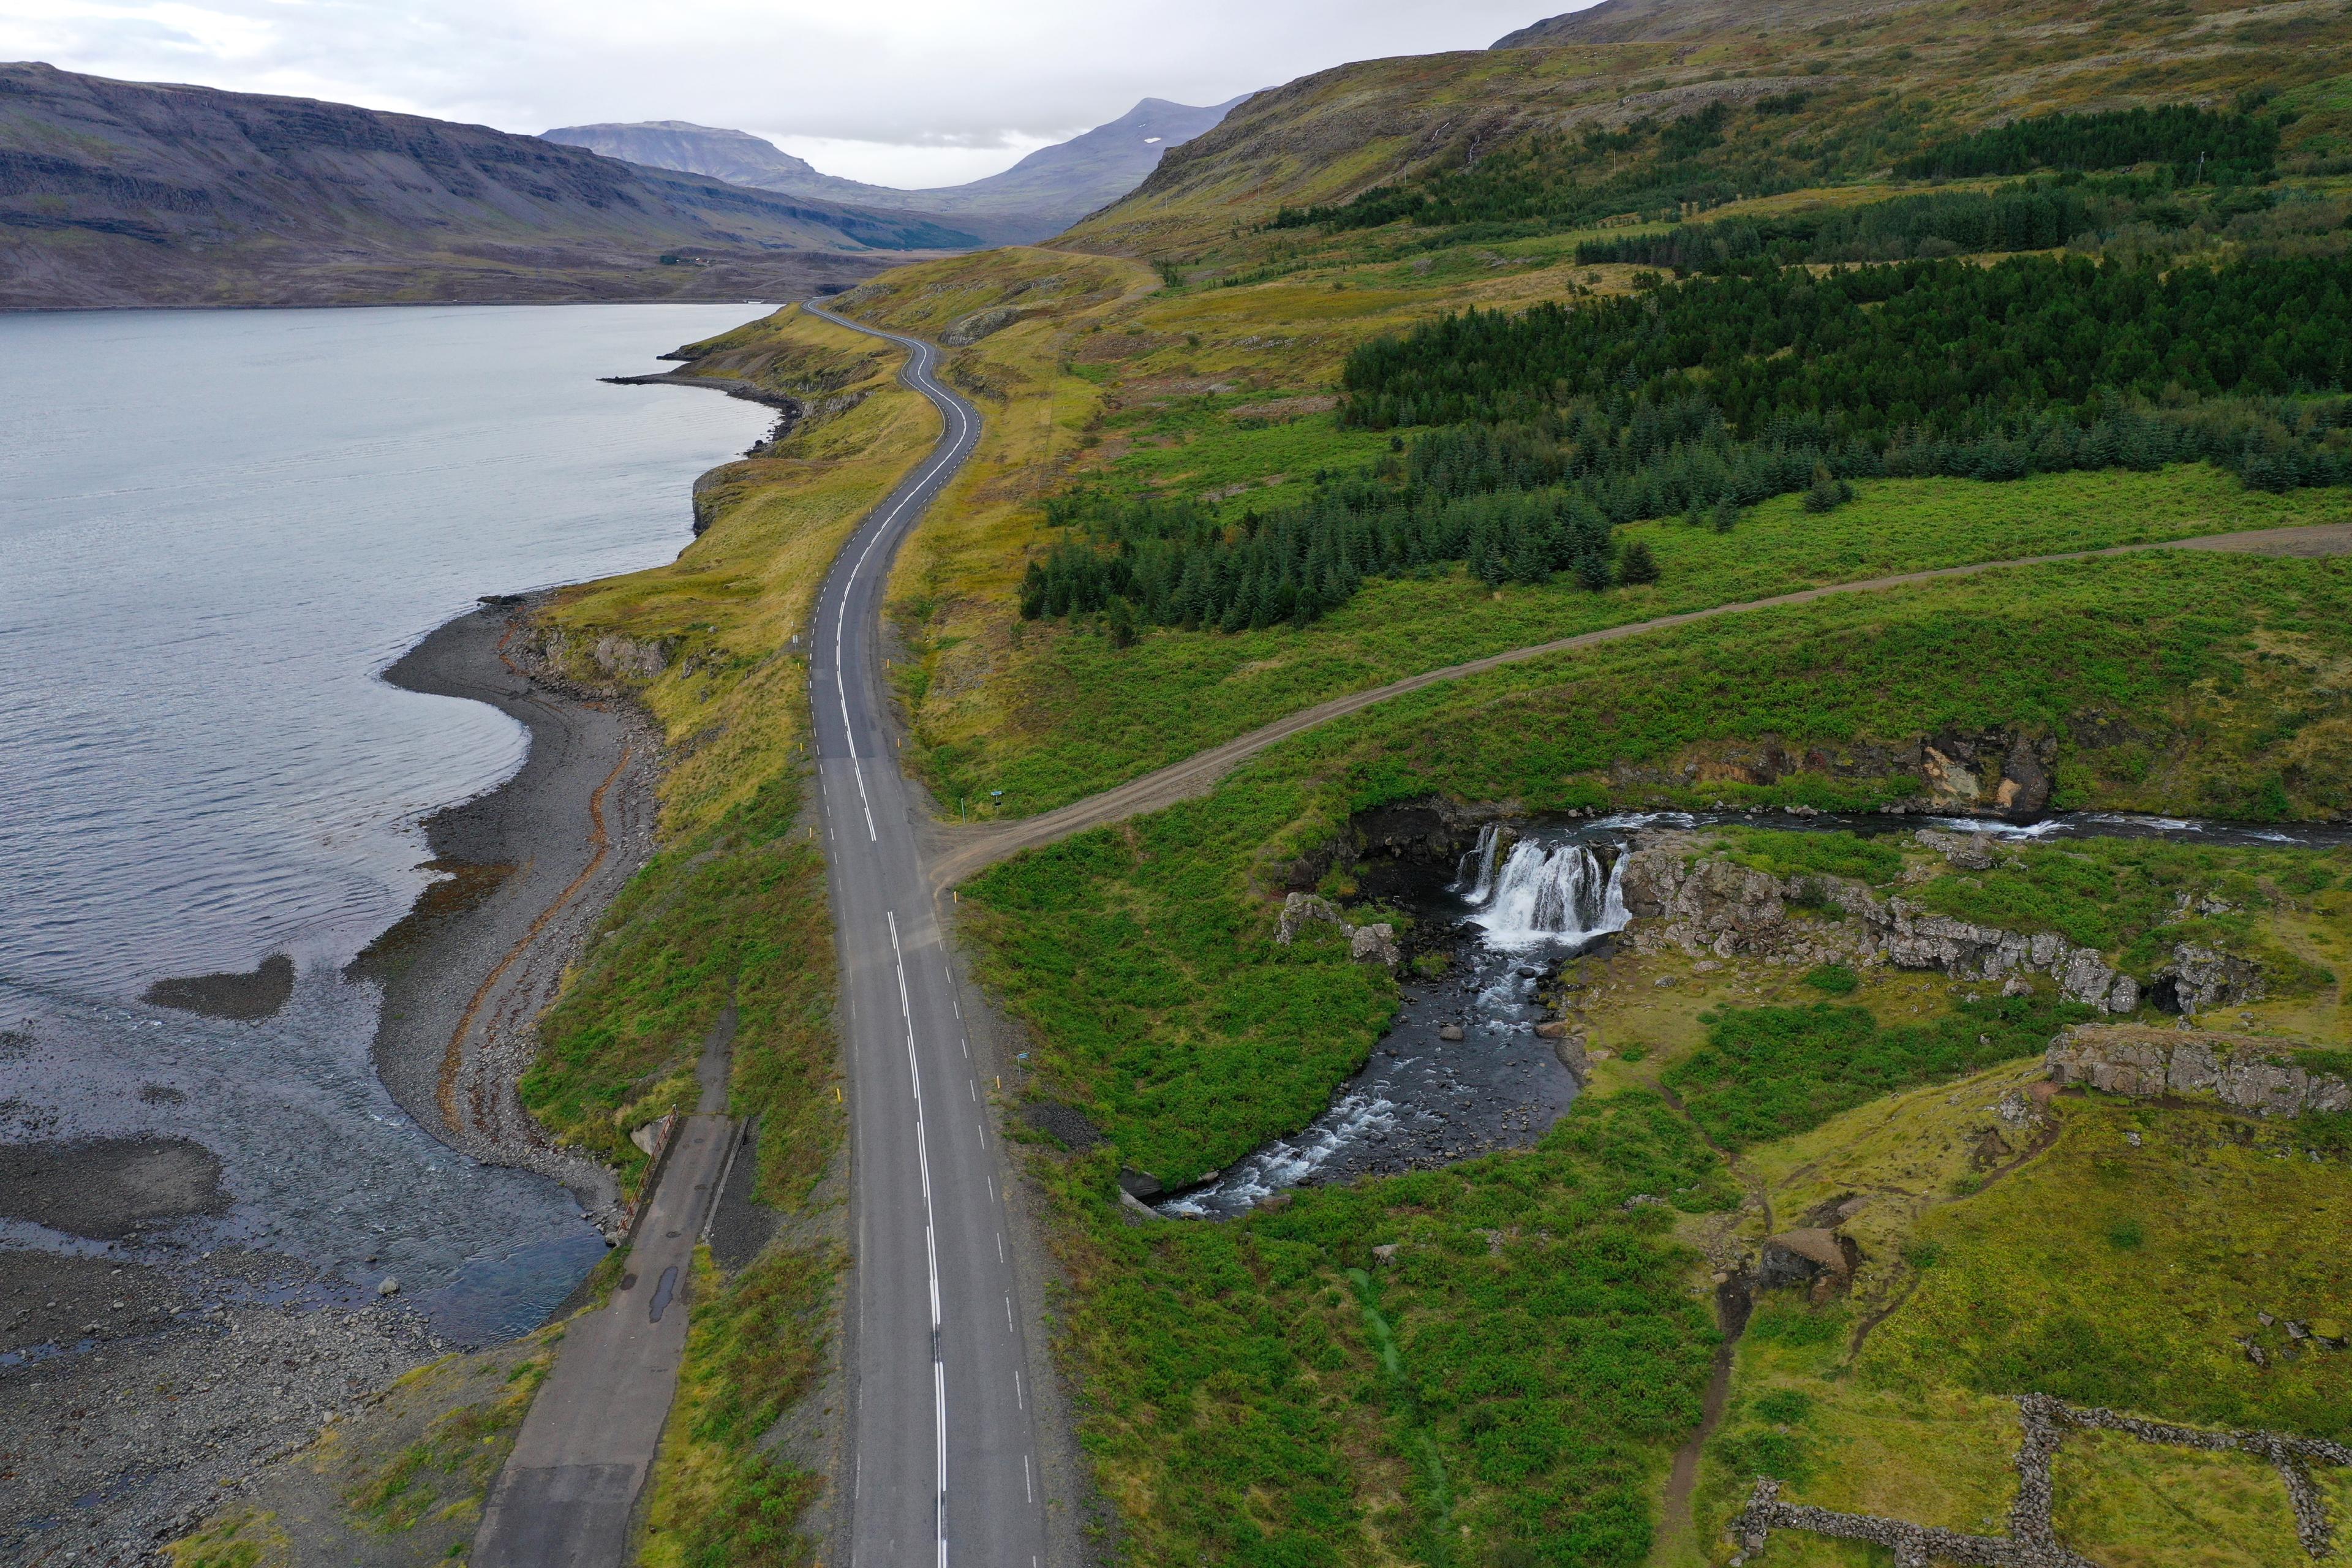 An aerial view reveals a serene Hvalfjörður, where a solitary road hugs the fjord's curve, bordered by lush green meadows and a quaint waterfall tumbling into the tranquil summer waters.